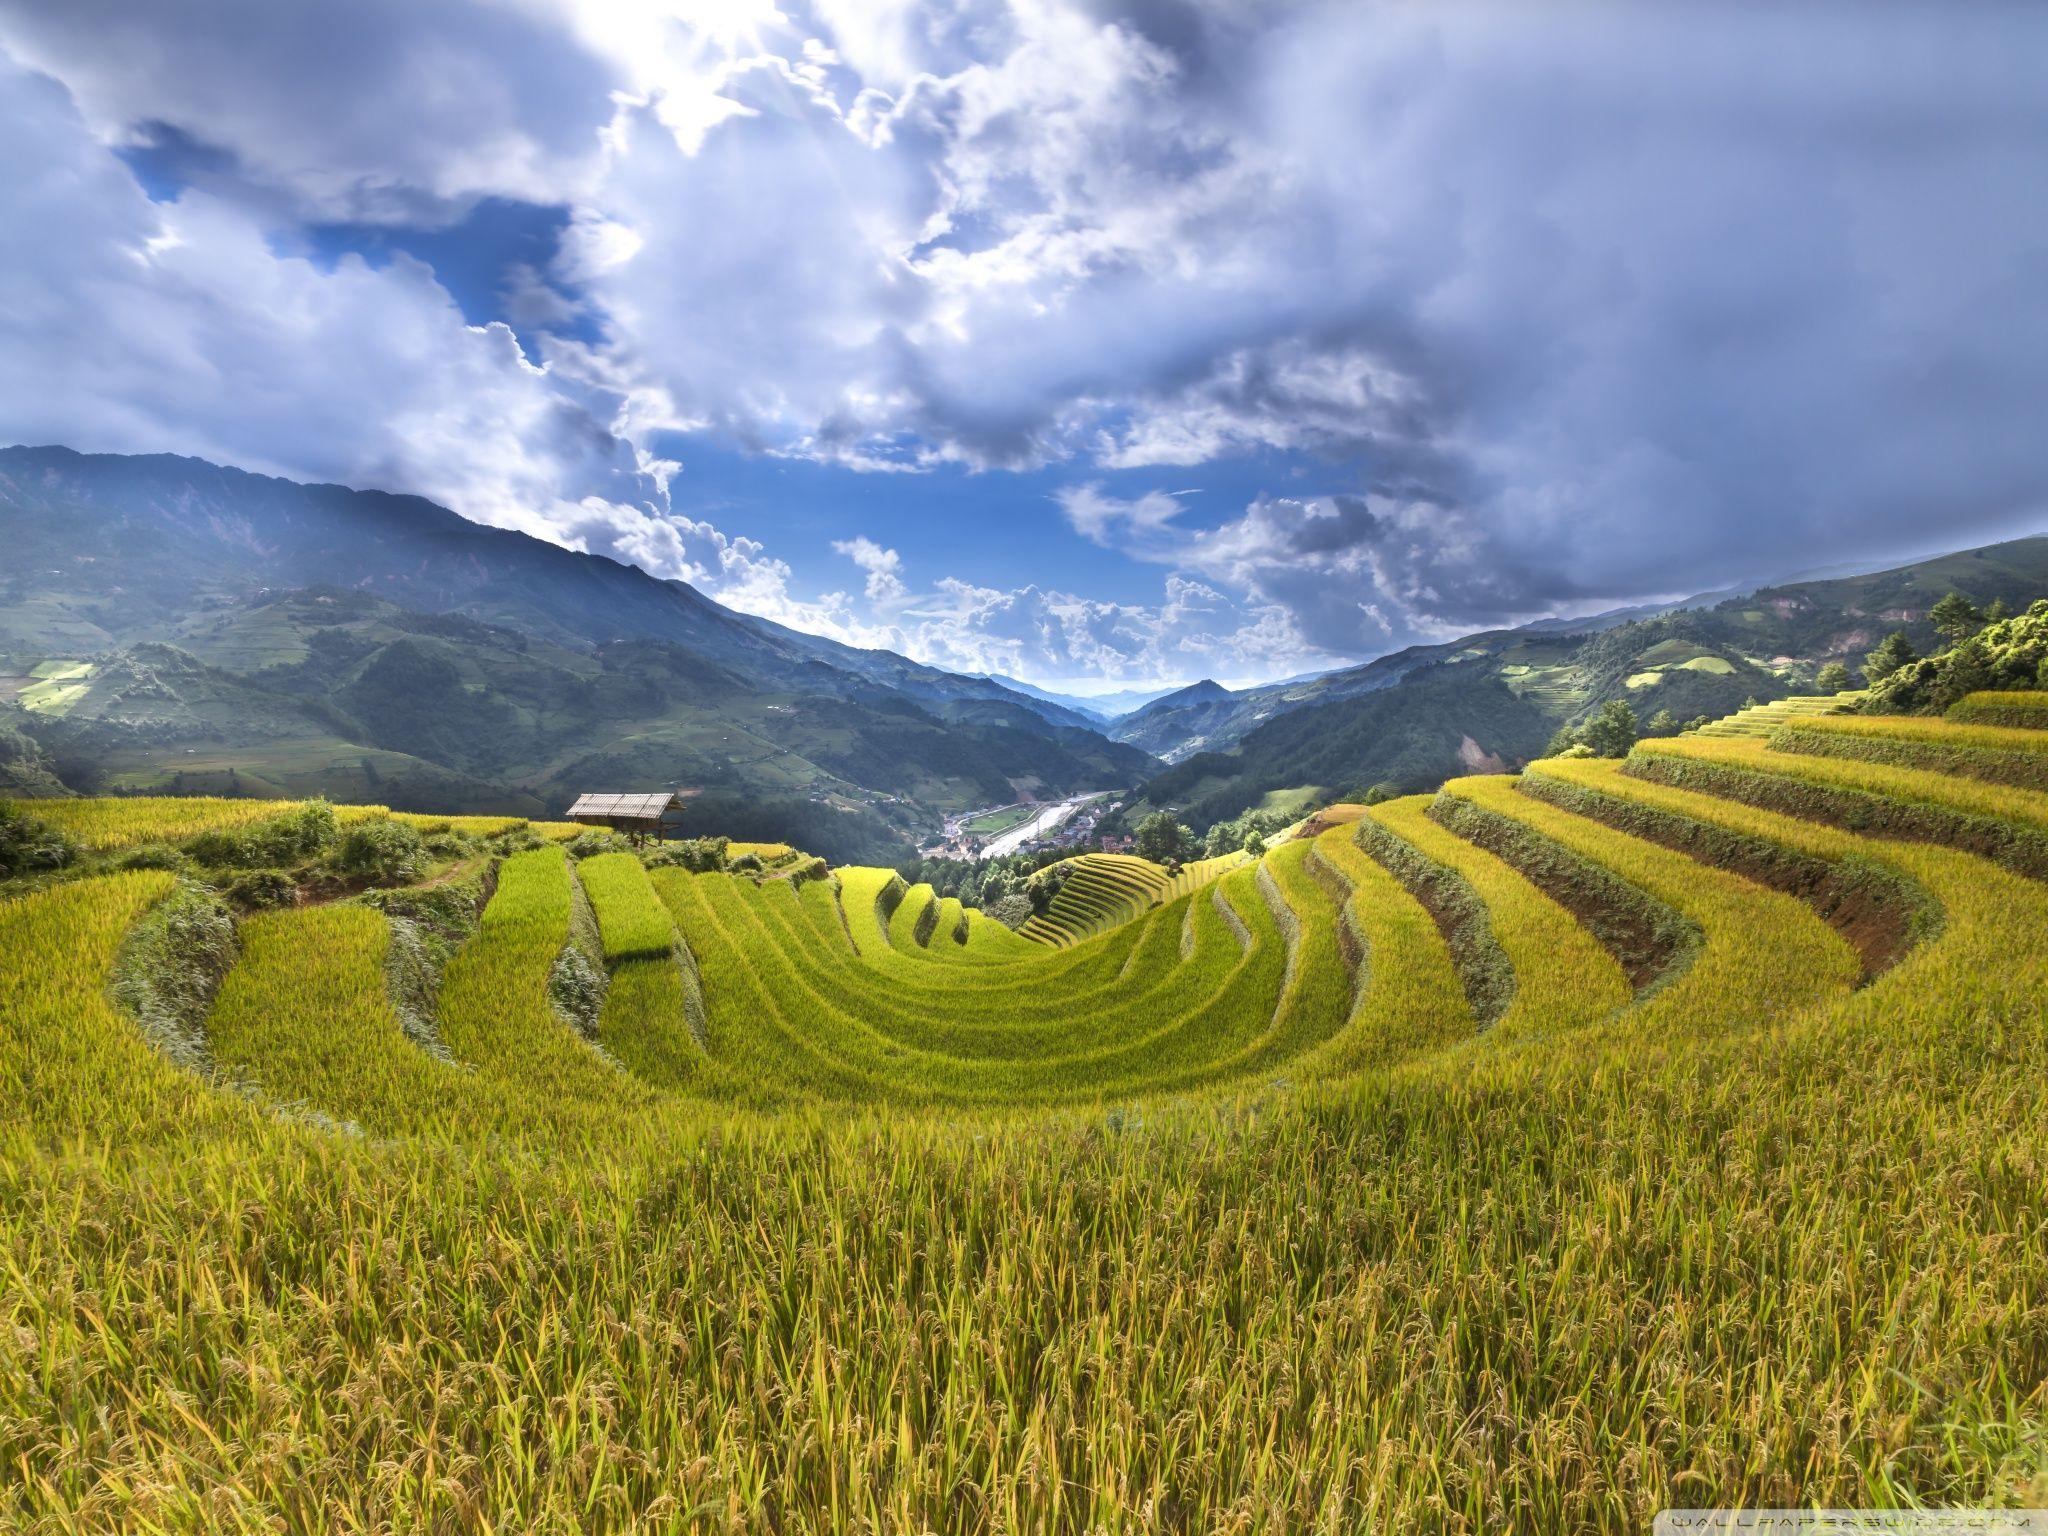  Rice  Fields Bali  Indonesia Wallpapers  Top Free Rice  